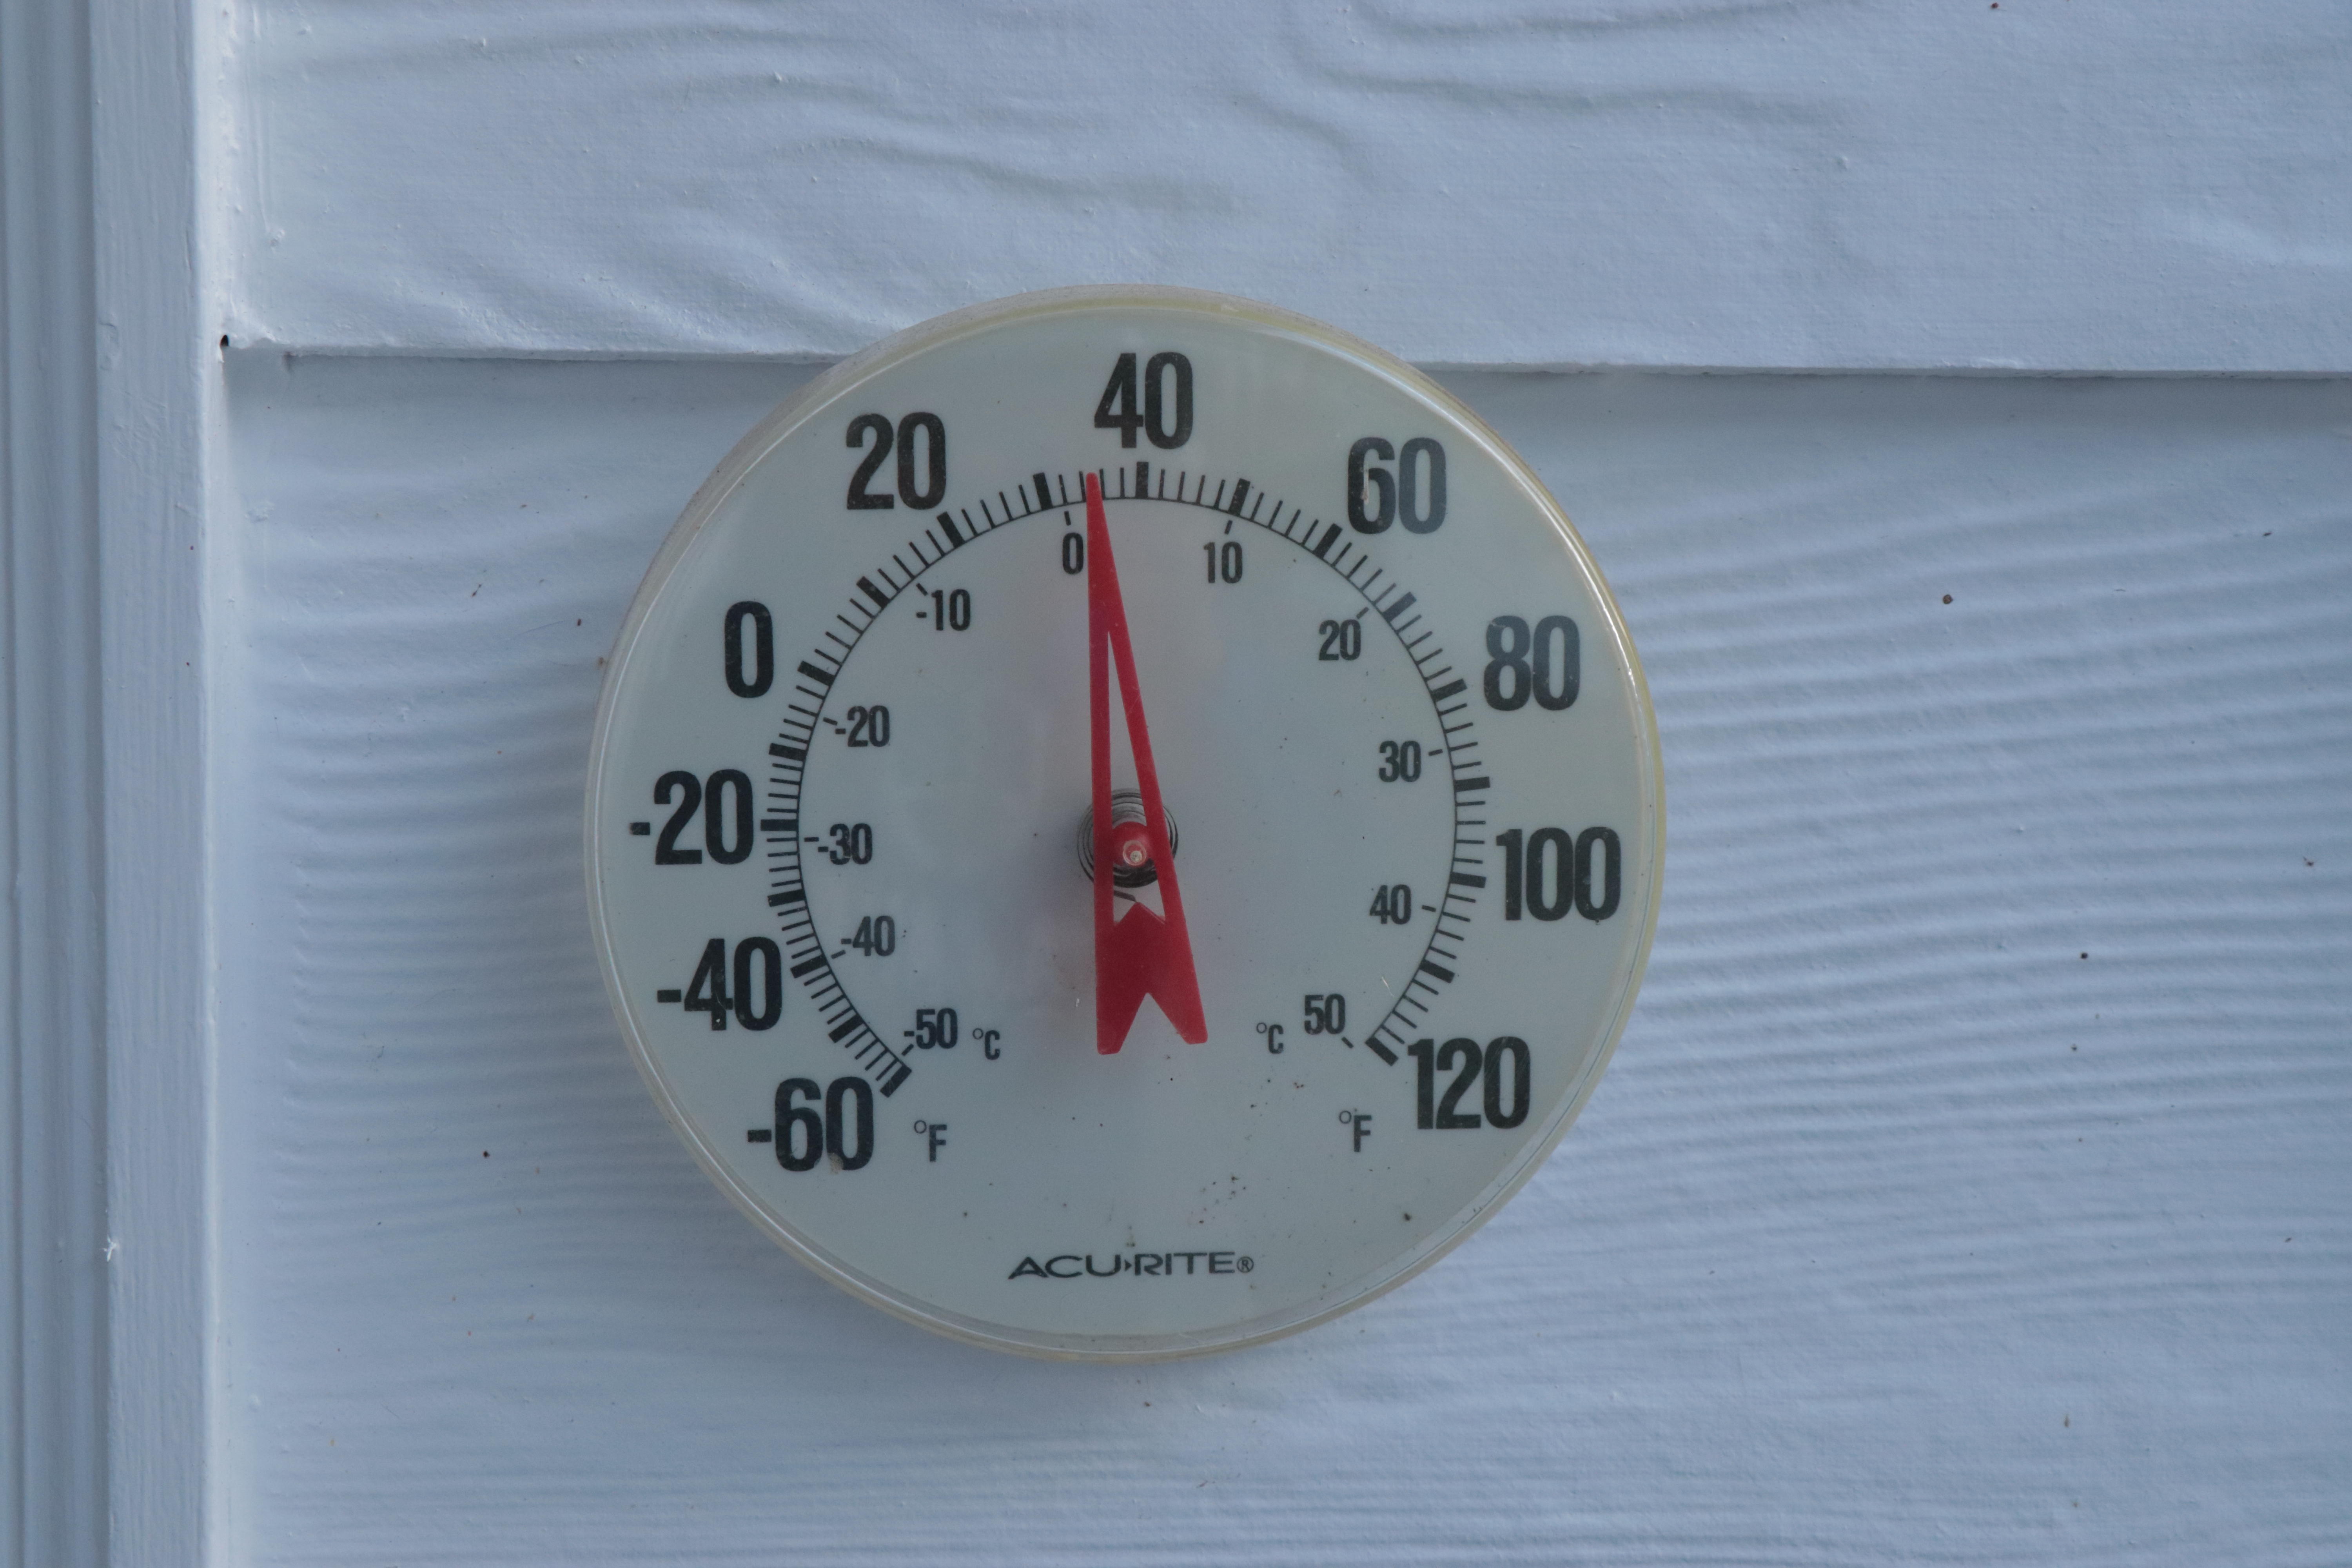 Patio thermometer reading 35 degrees F.